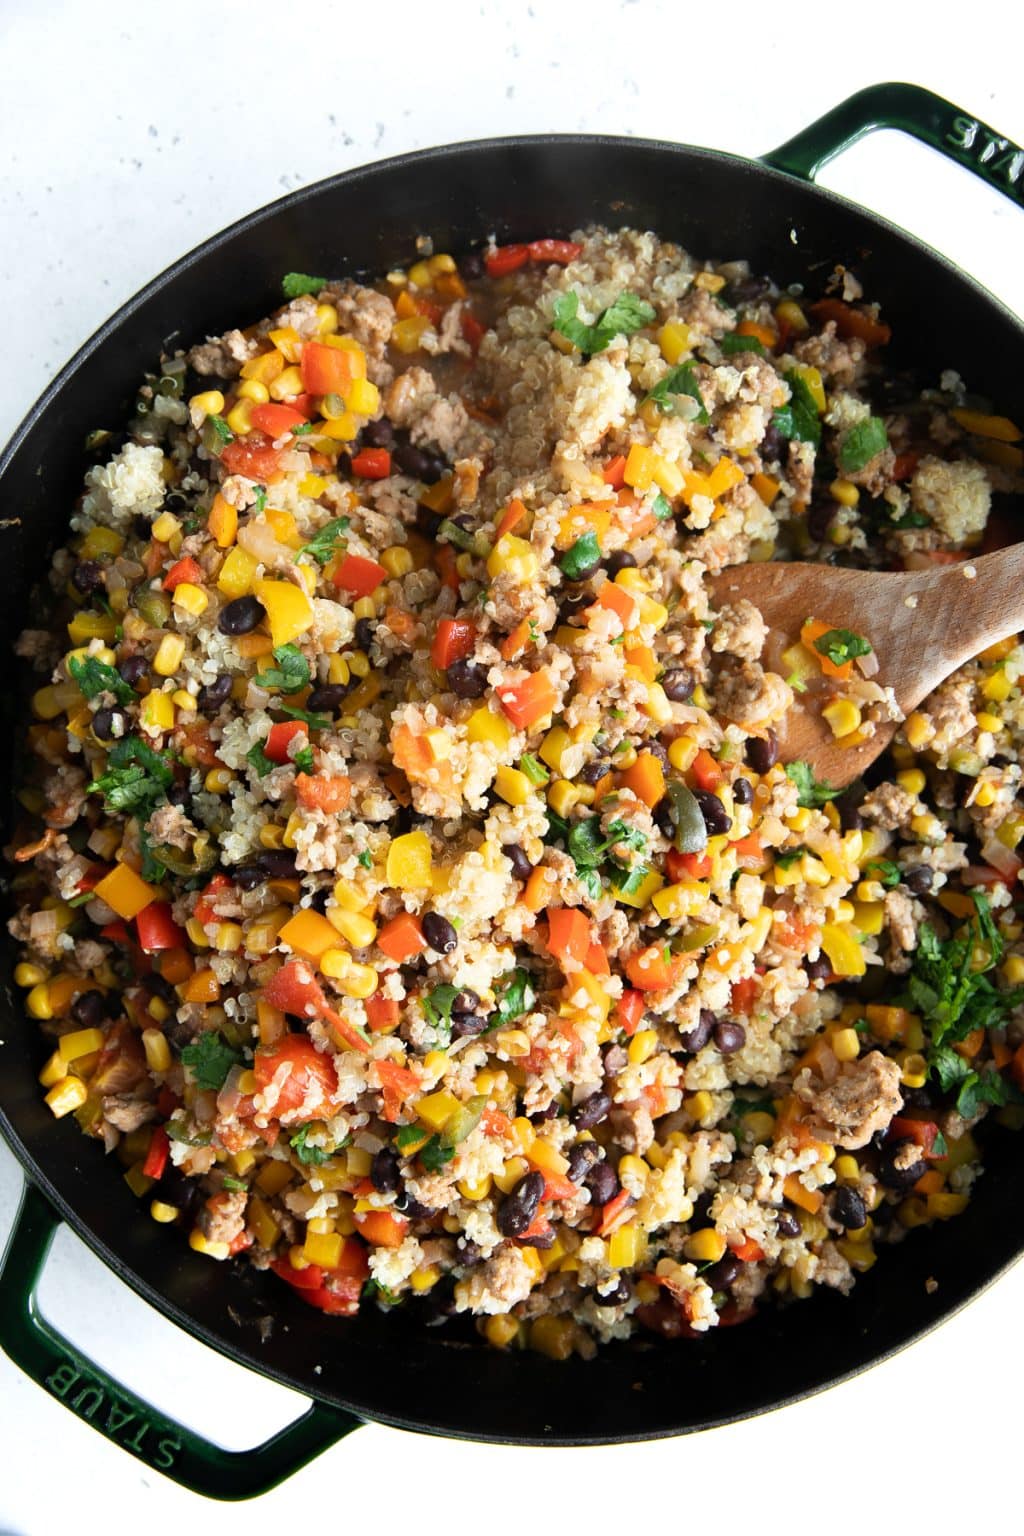 Easy Mexican Quinoa Casserole Recipe (One Pan) - The Forked Spoon